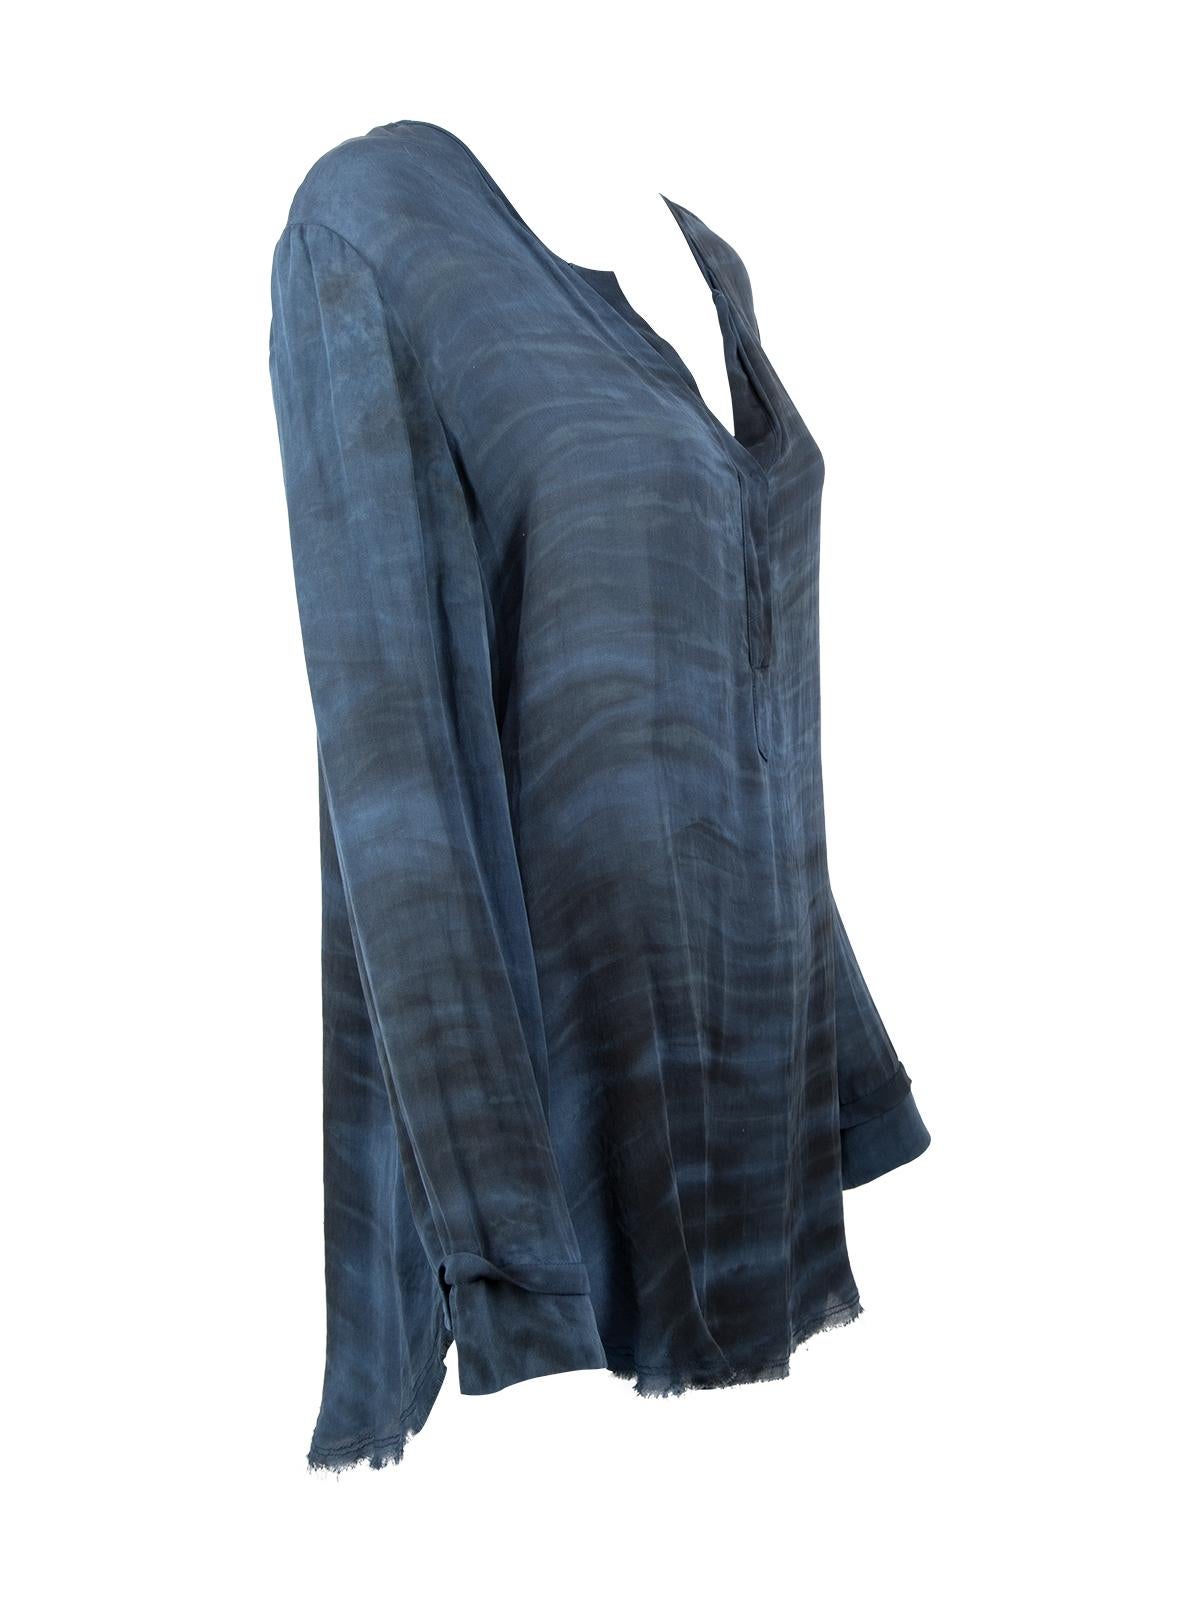 CONDITION is Very good. Minimal wear to top is evident. Minimal loose threads on this used Raquel Allegra designer resale item. Details Blue Silk Evening wear Loose fit Long sleeves Snap fastenings V-neck Distressed hem-line detailing Made in USA